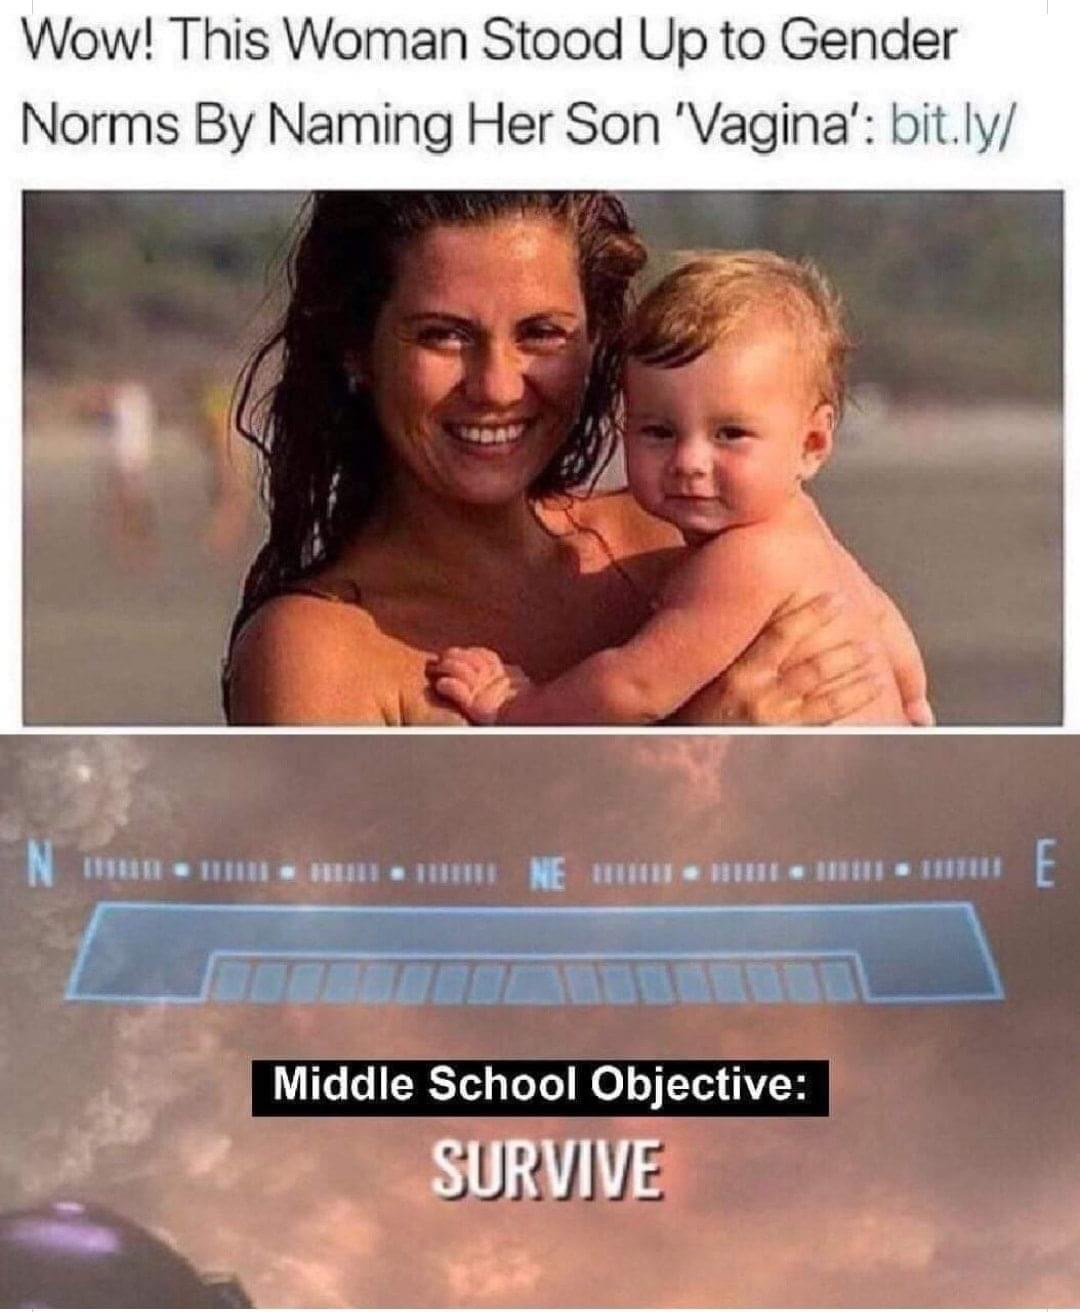 defcon memes - Wow! This Woman Stood Up to Gender Norms By Naming Her Son 'Vagina' bit.ly Nim Ne eum E Middle School Objective Survive